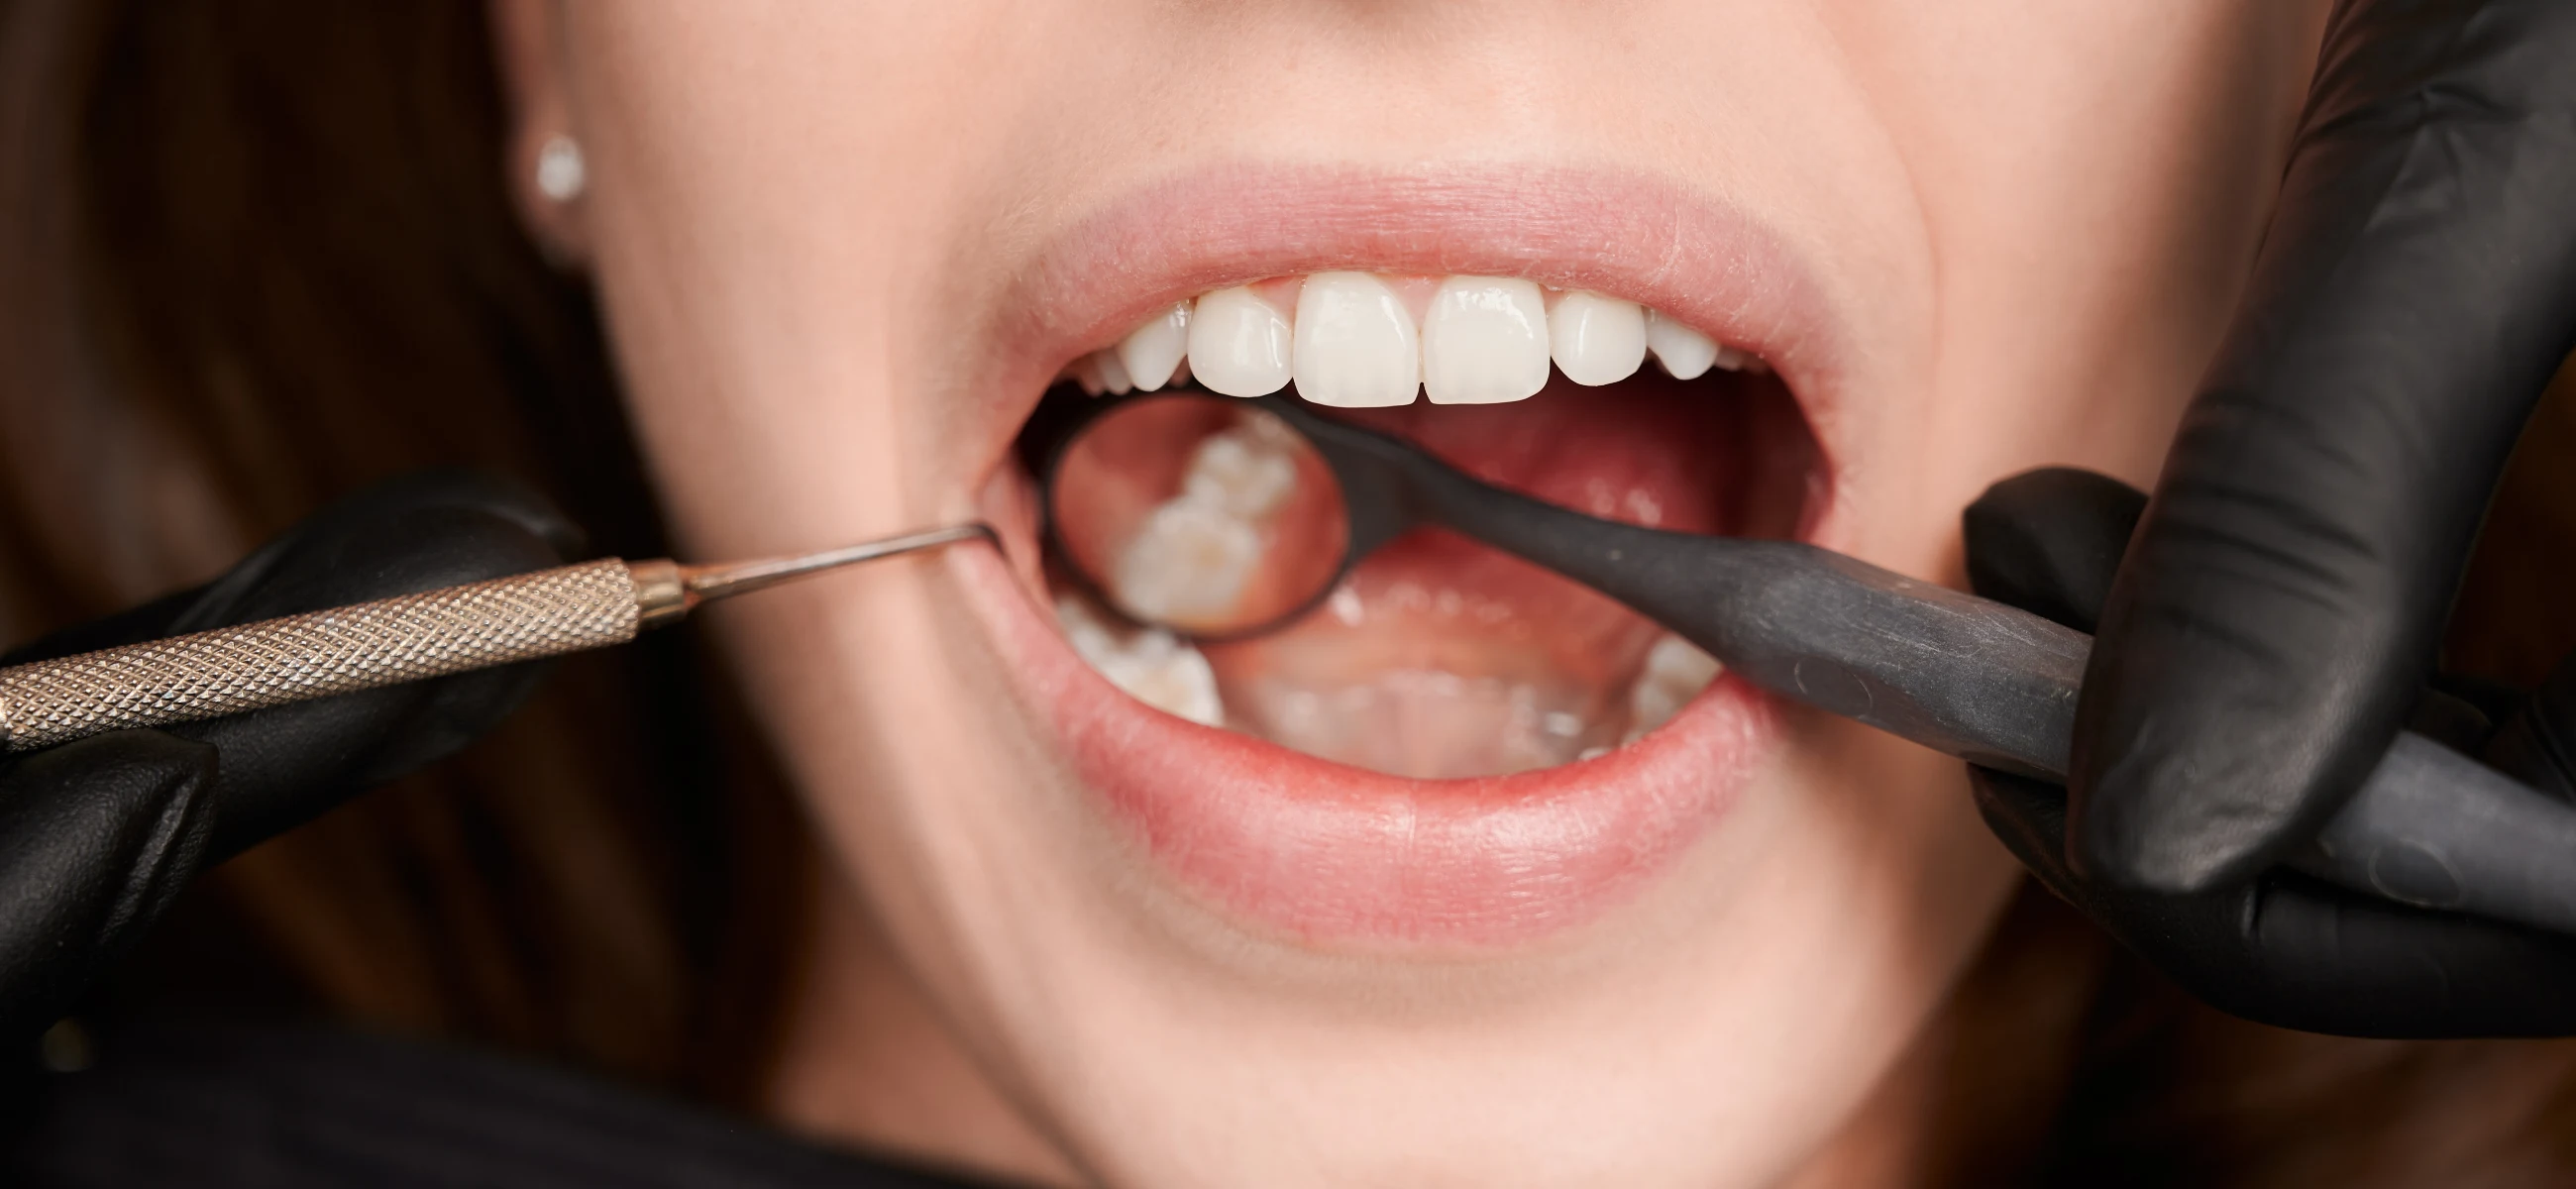 4 best cavity treatments: Is cavity treatment at home possible?